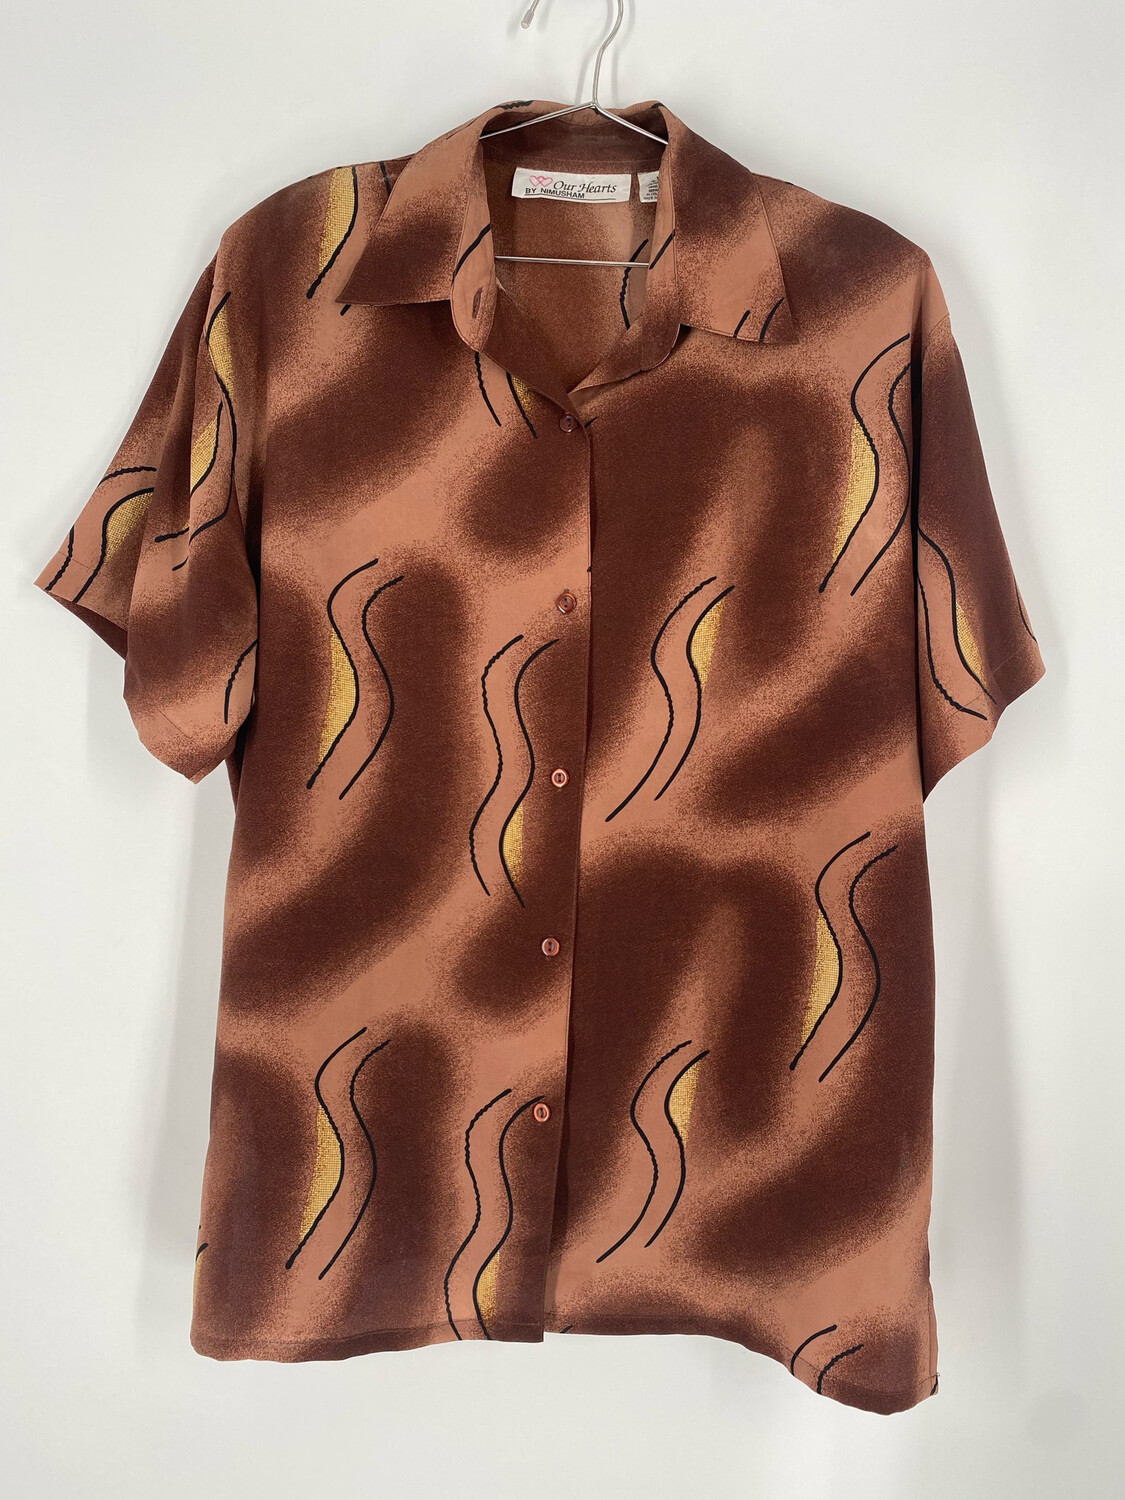 Our Hearts By Nimhusham Abstract Printed Button Up Top Size 1X